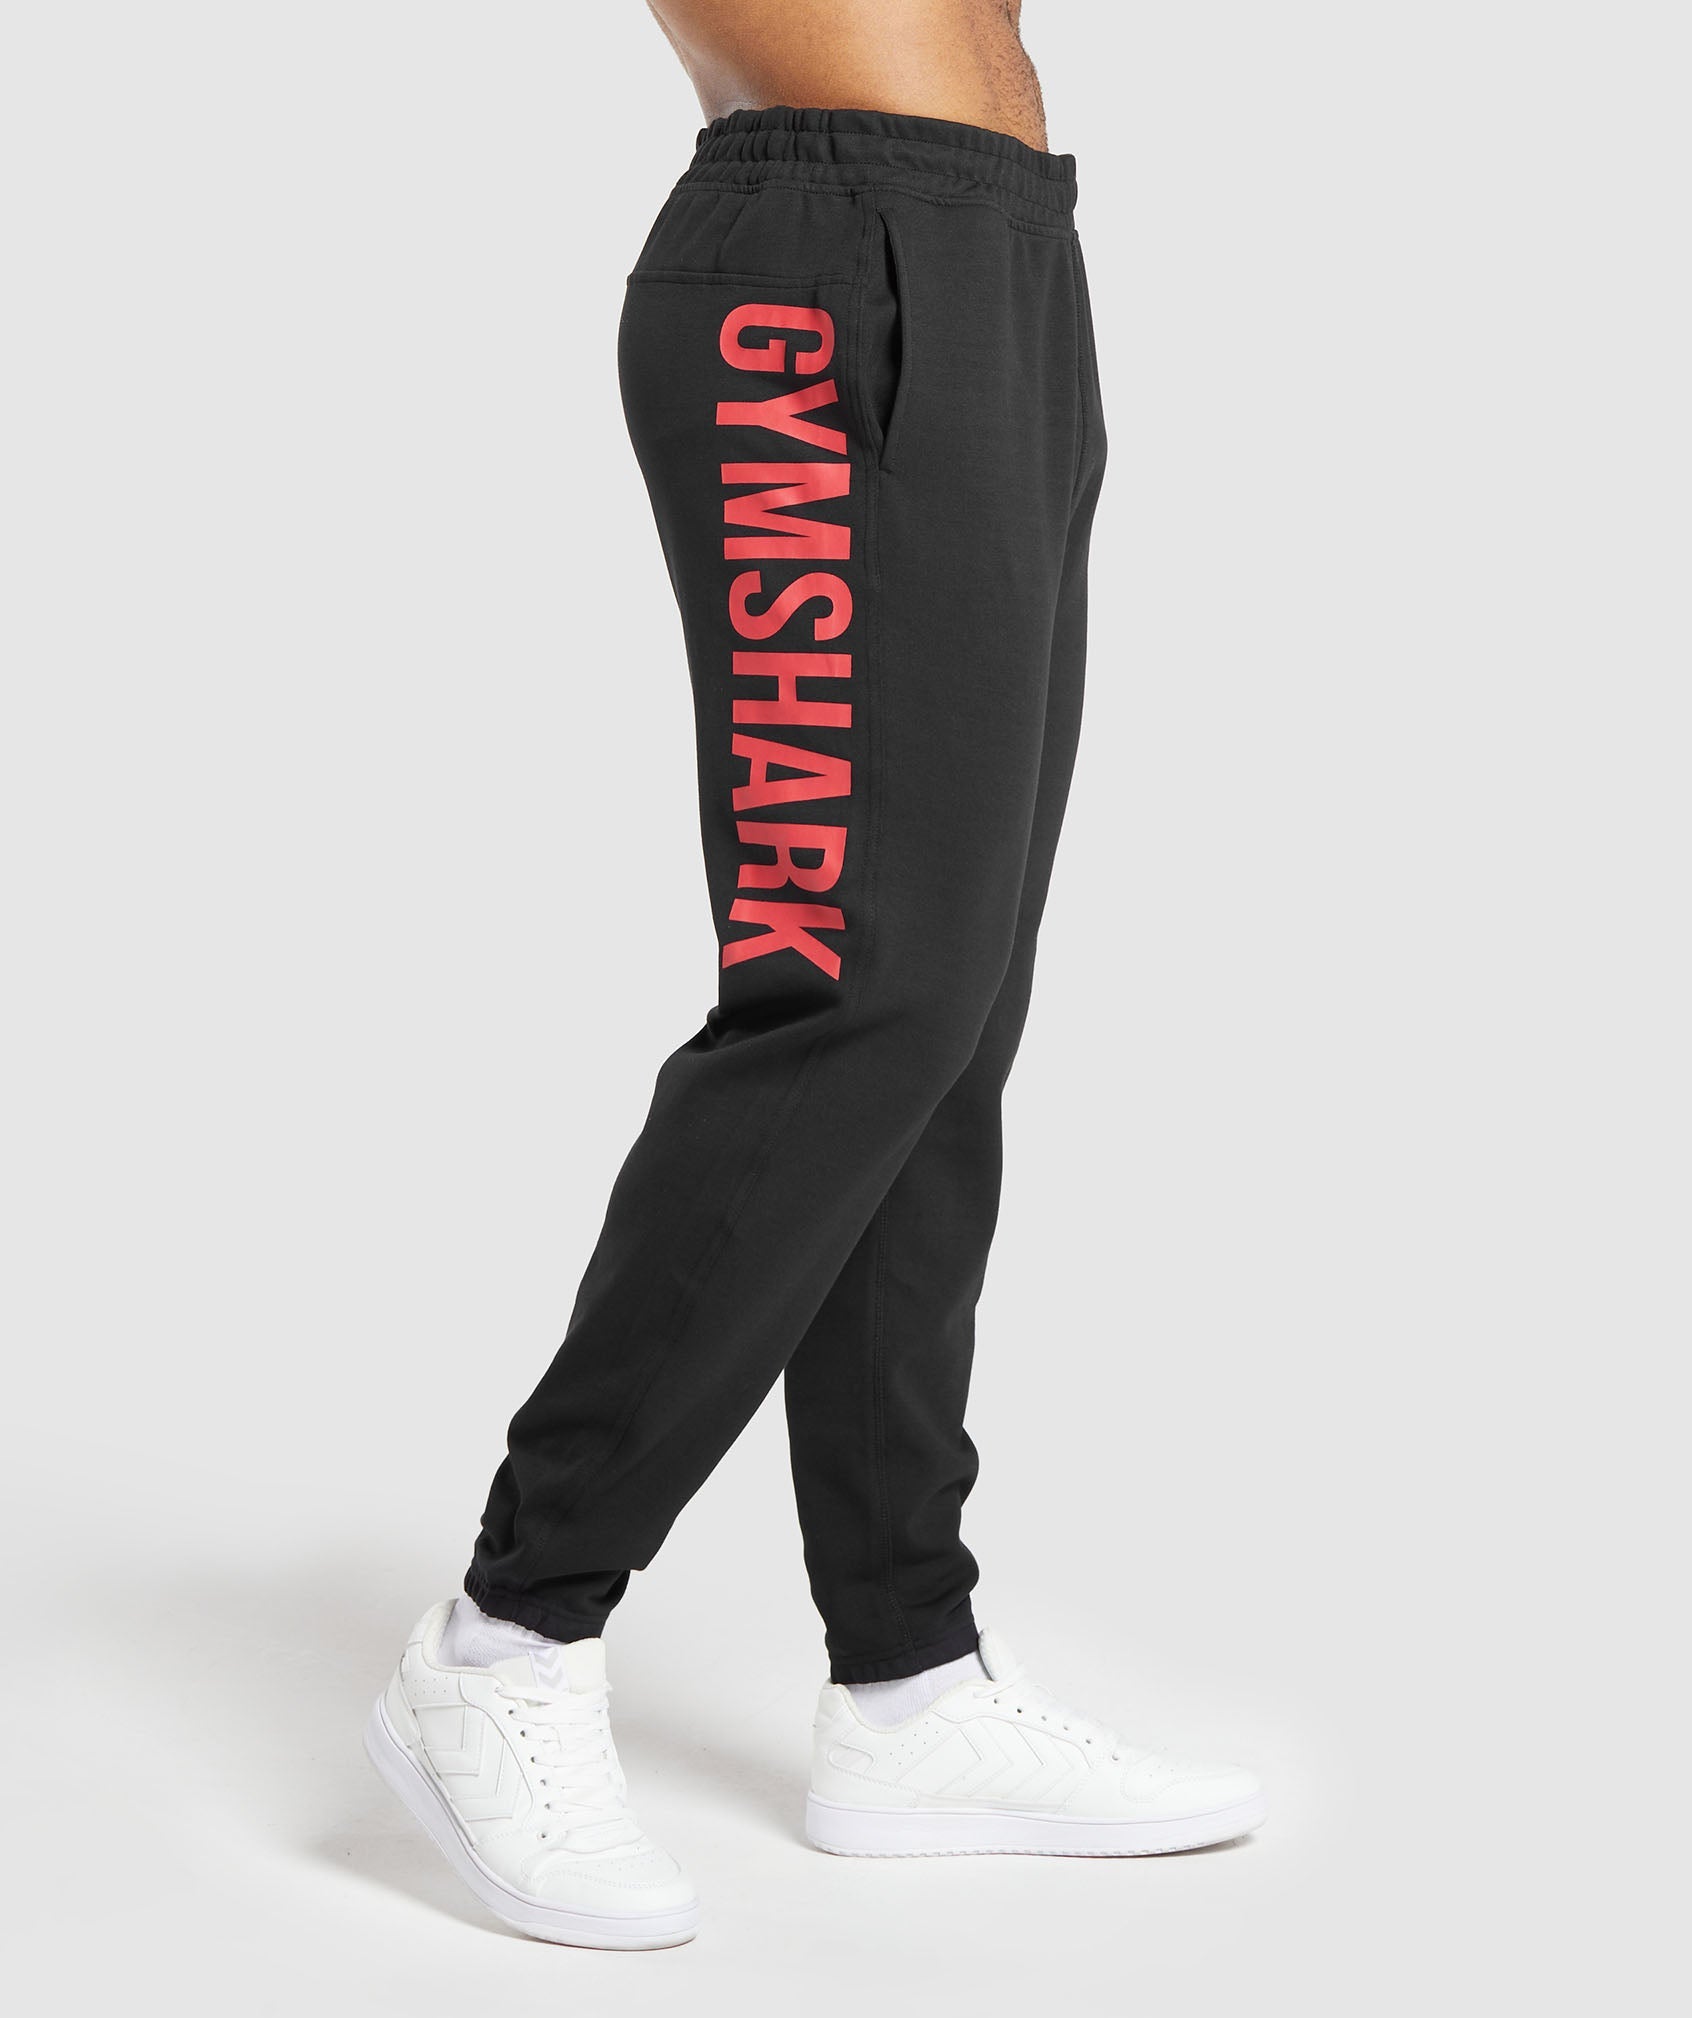 Impact Joggers in Black/Vivid Red - view 1